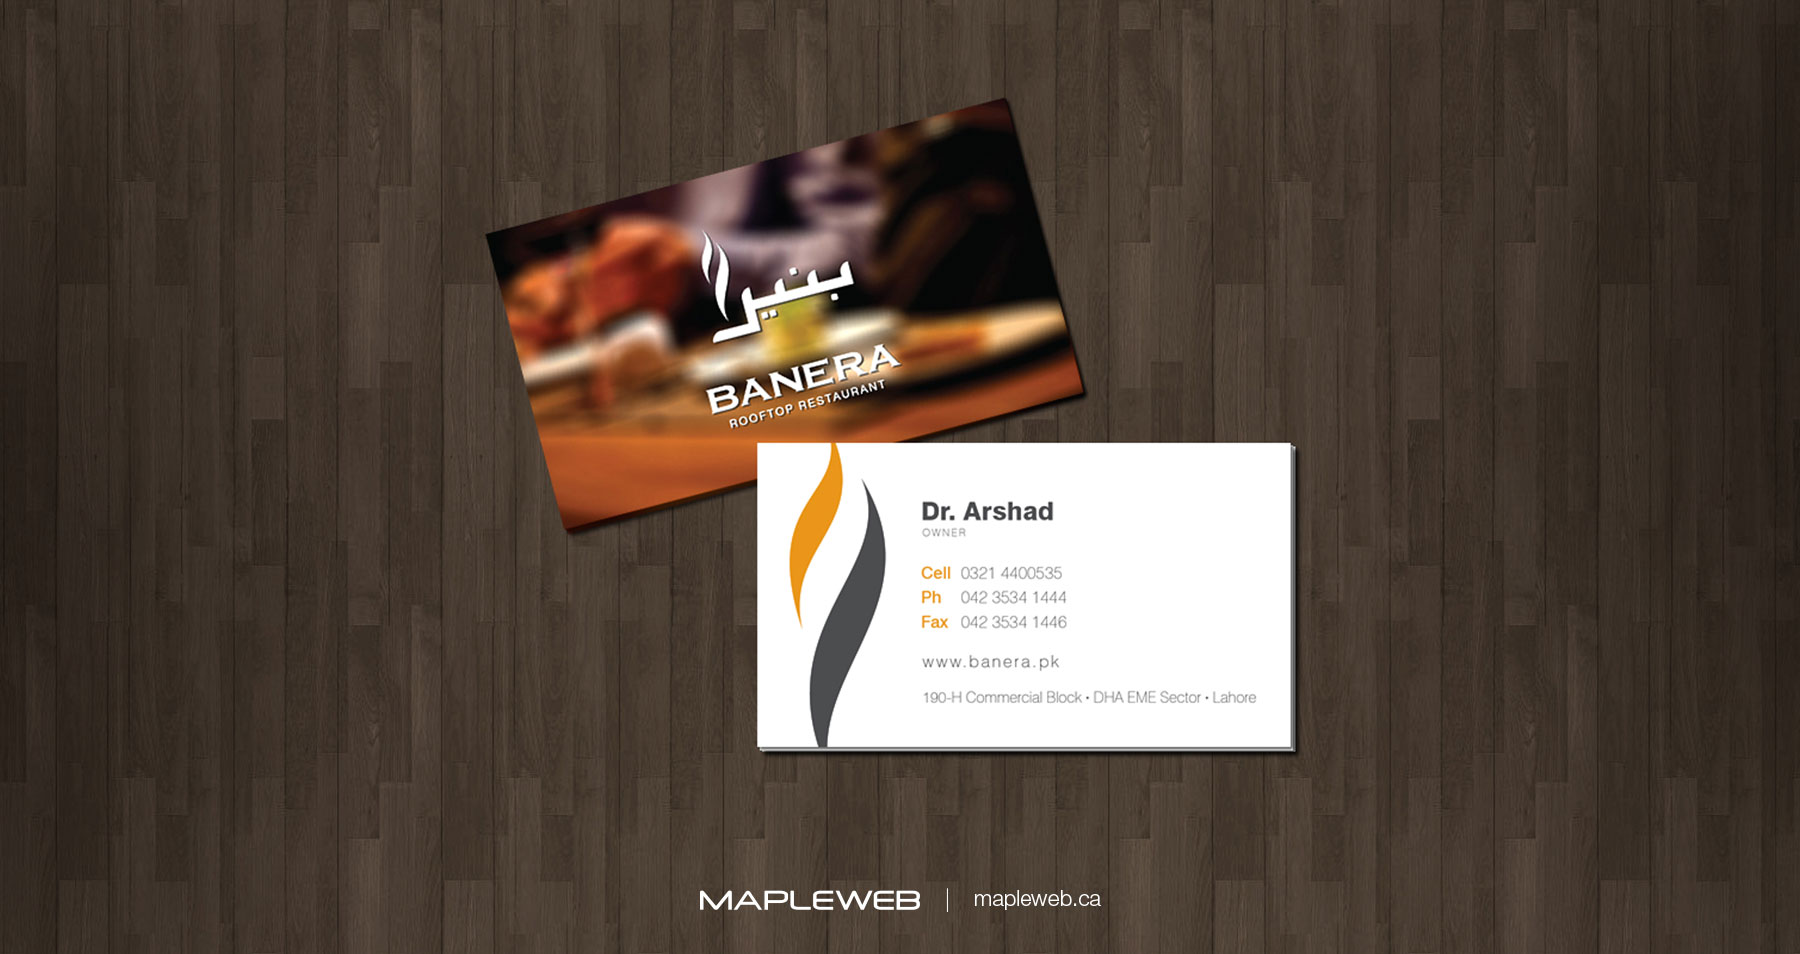 Banera RoofTop Business Card Brand design by Mapleweb